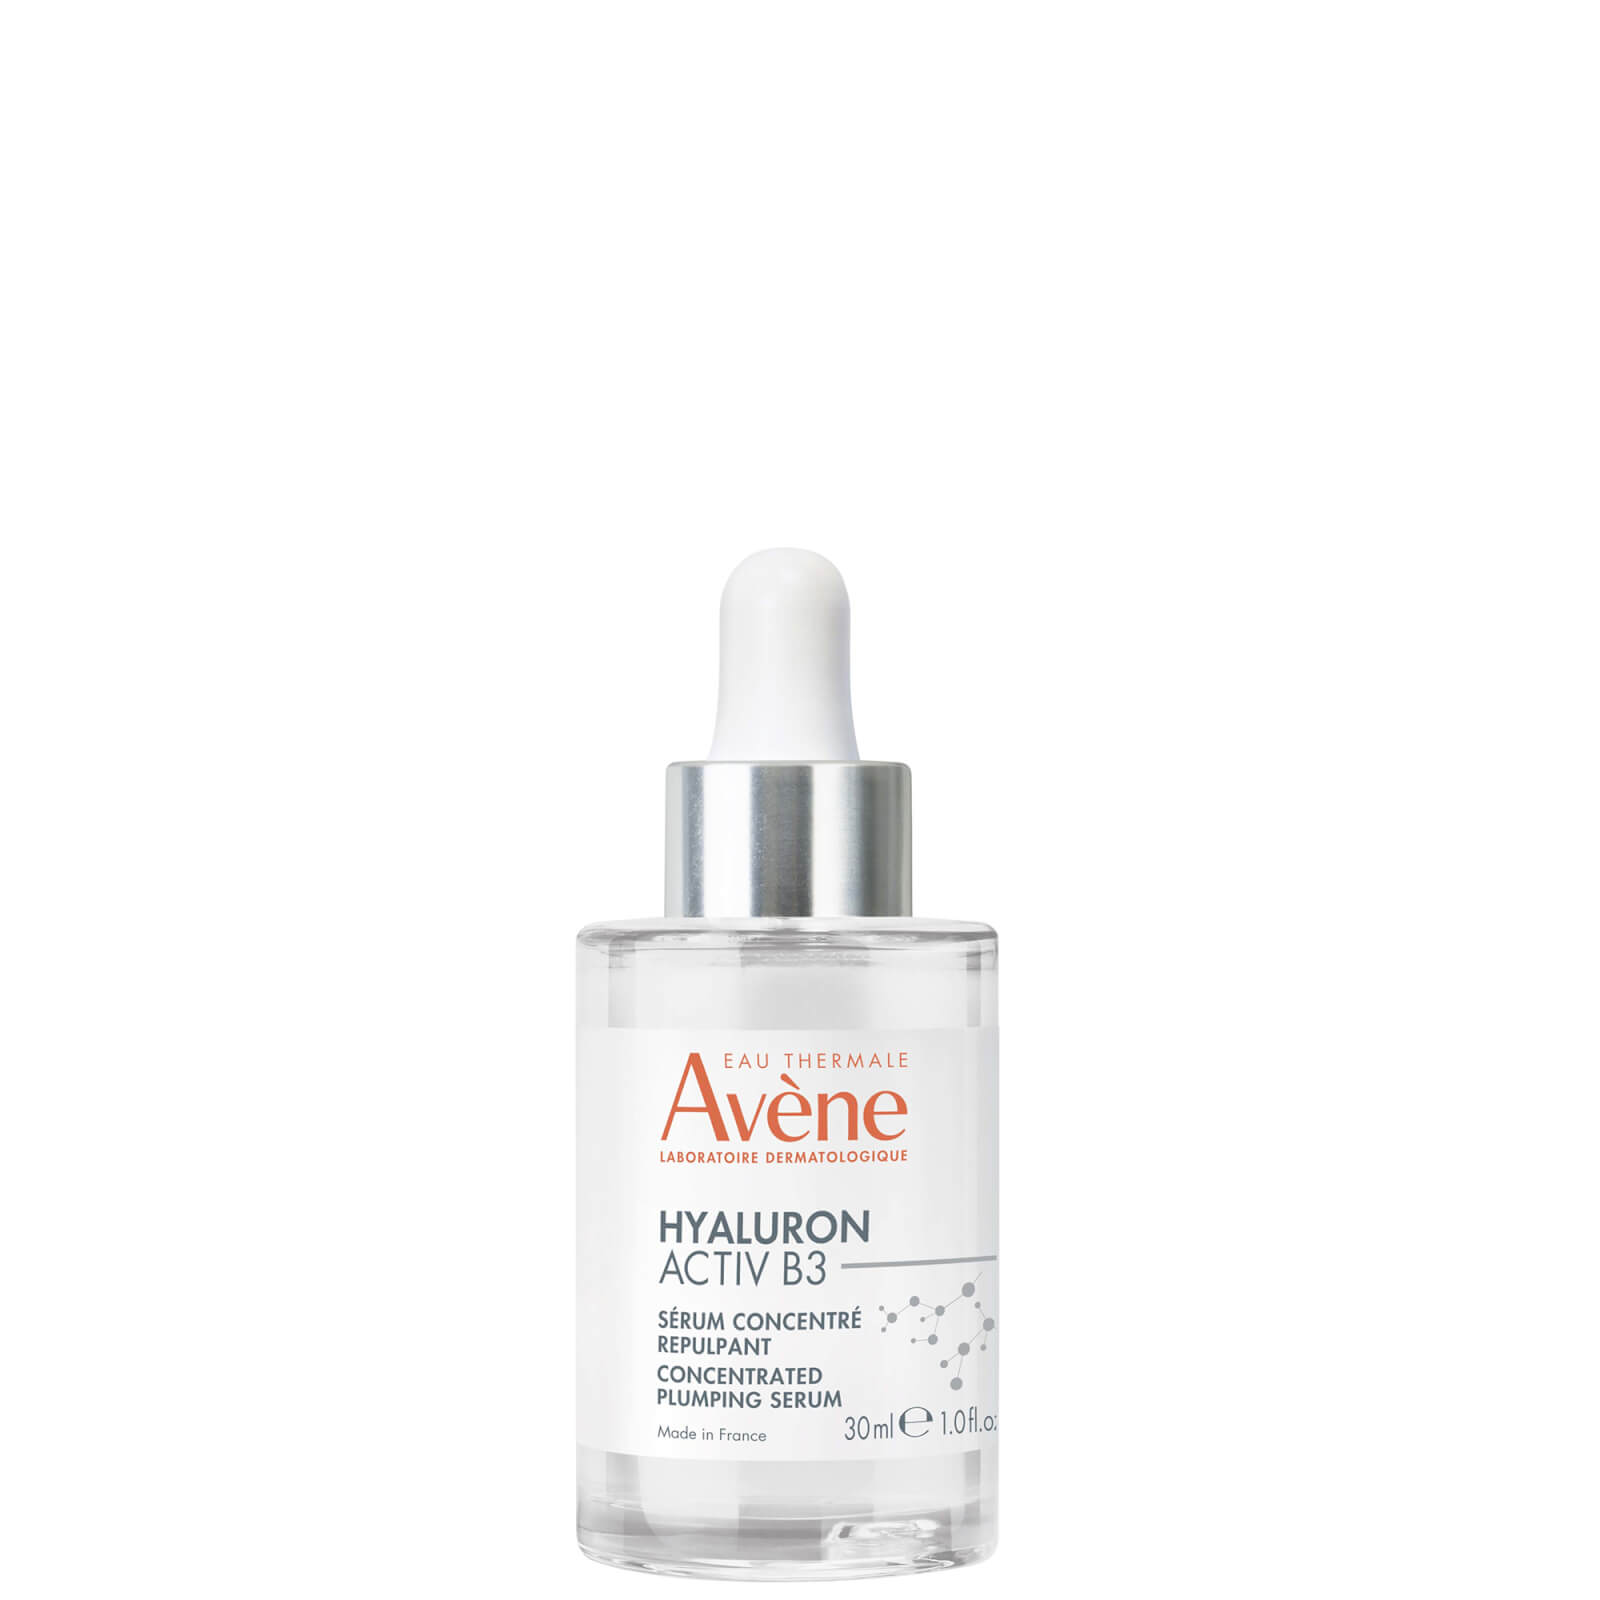 Avene Hyaluron Activ B3 Concentrated Plumping Serum 30ml